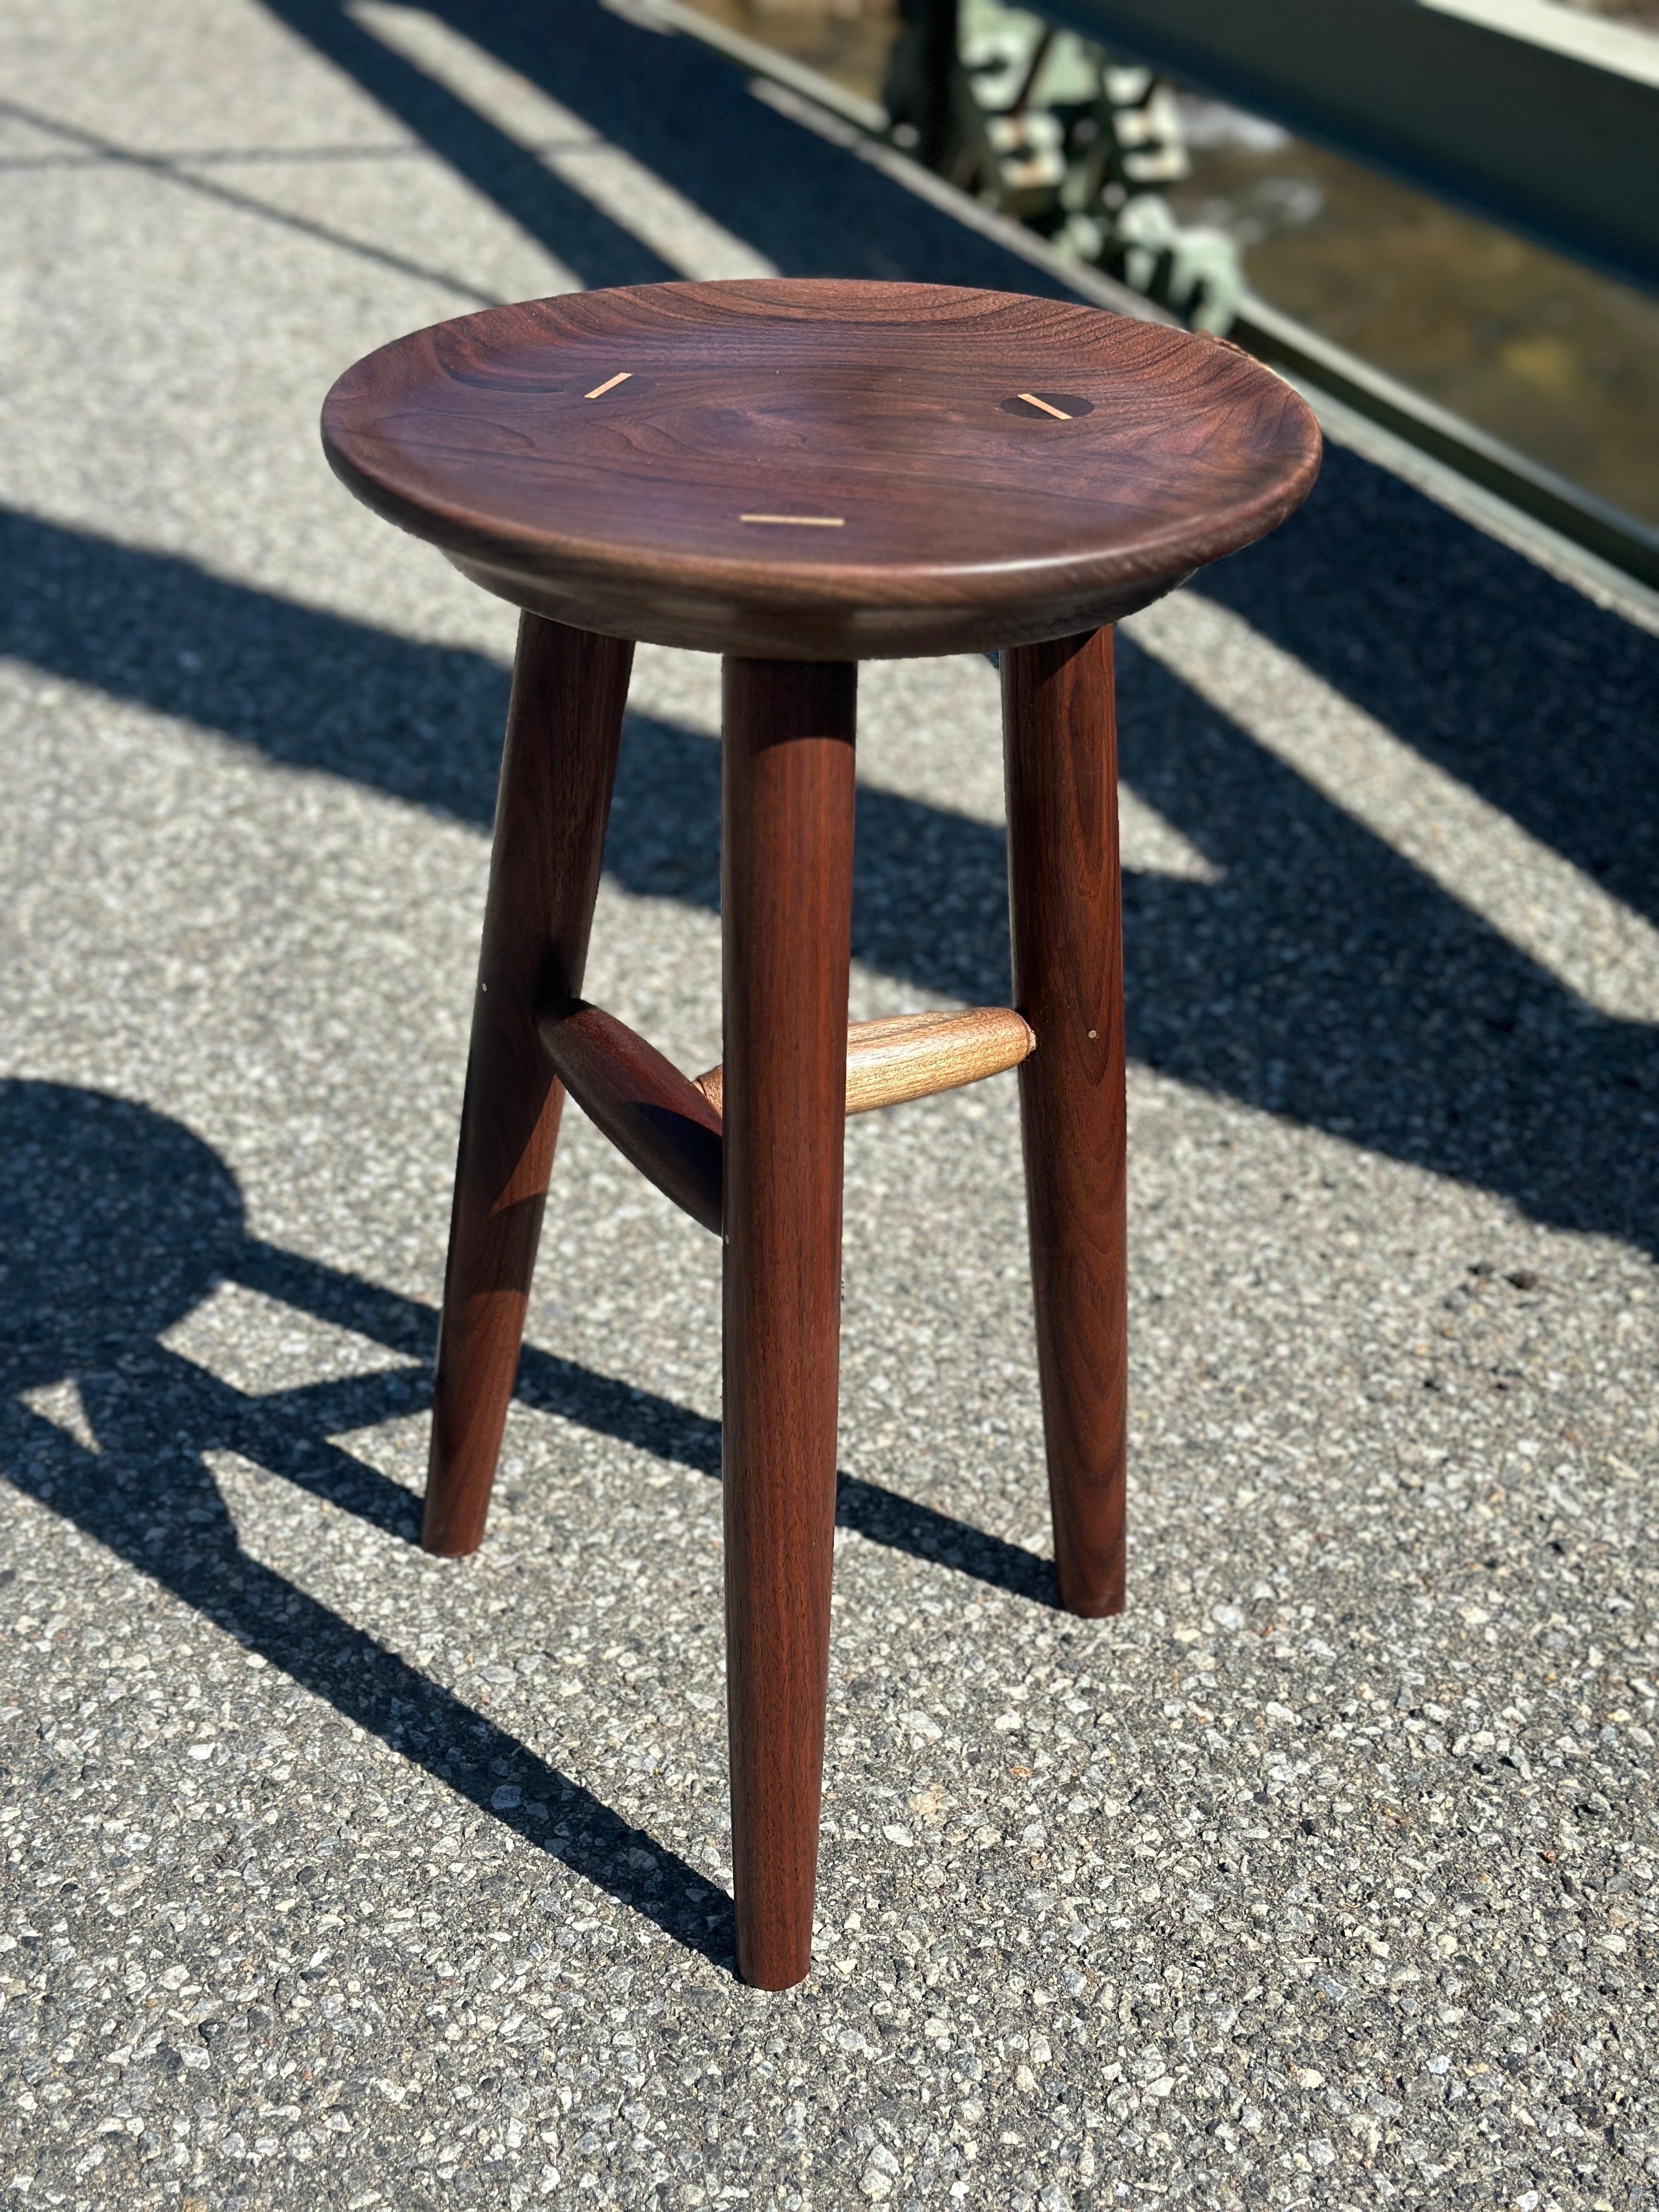 American black walnut accented with brass and maple.
Signed and dated to underside 